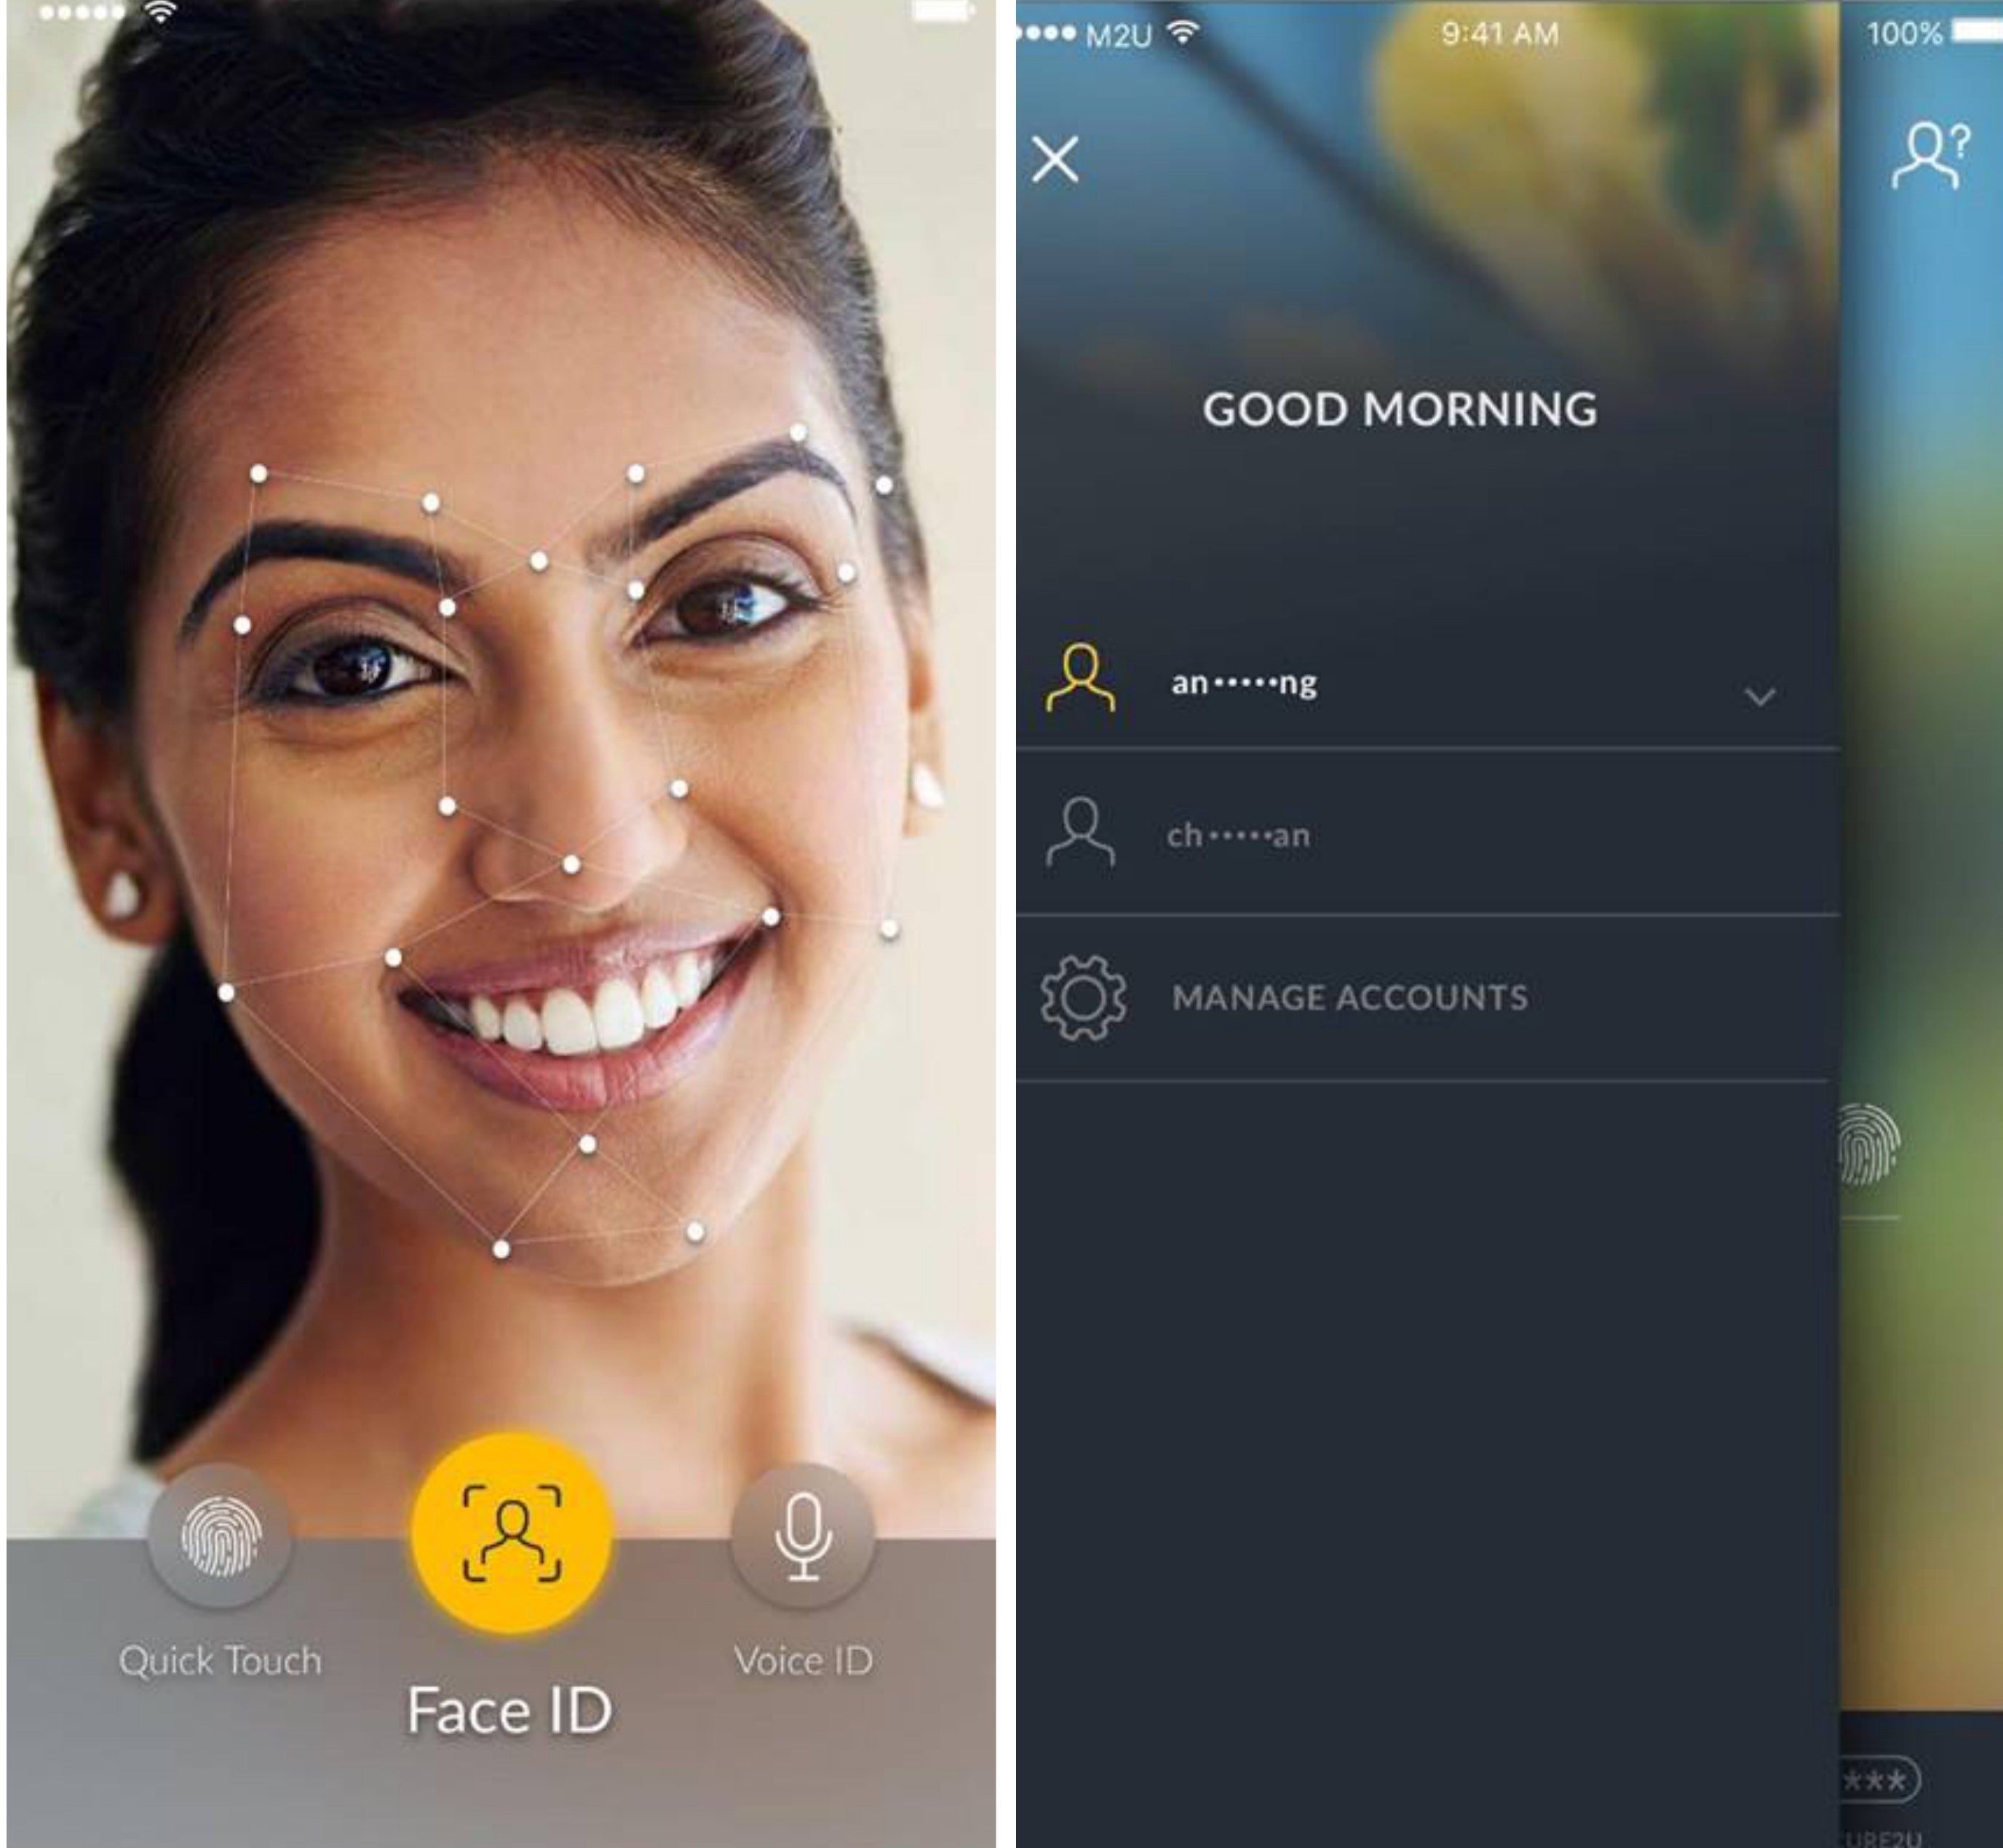 Malaysians Can Now Scan Their Face and Voice To Use the Maybank2u App - WORLD OF BUZZ 1